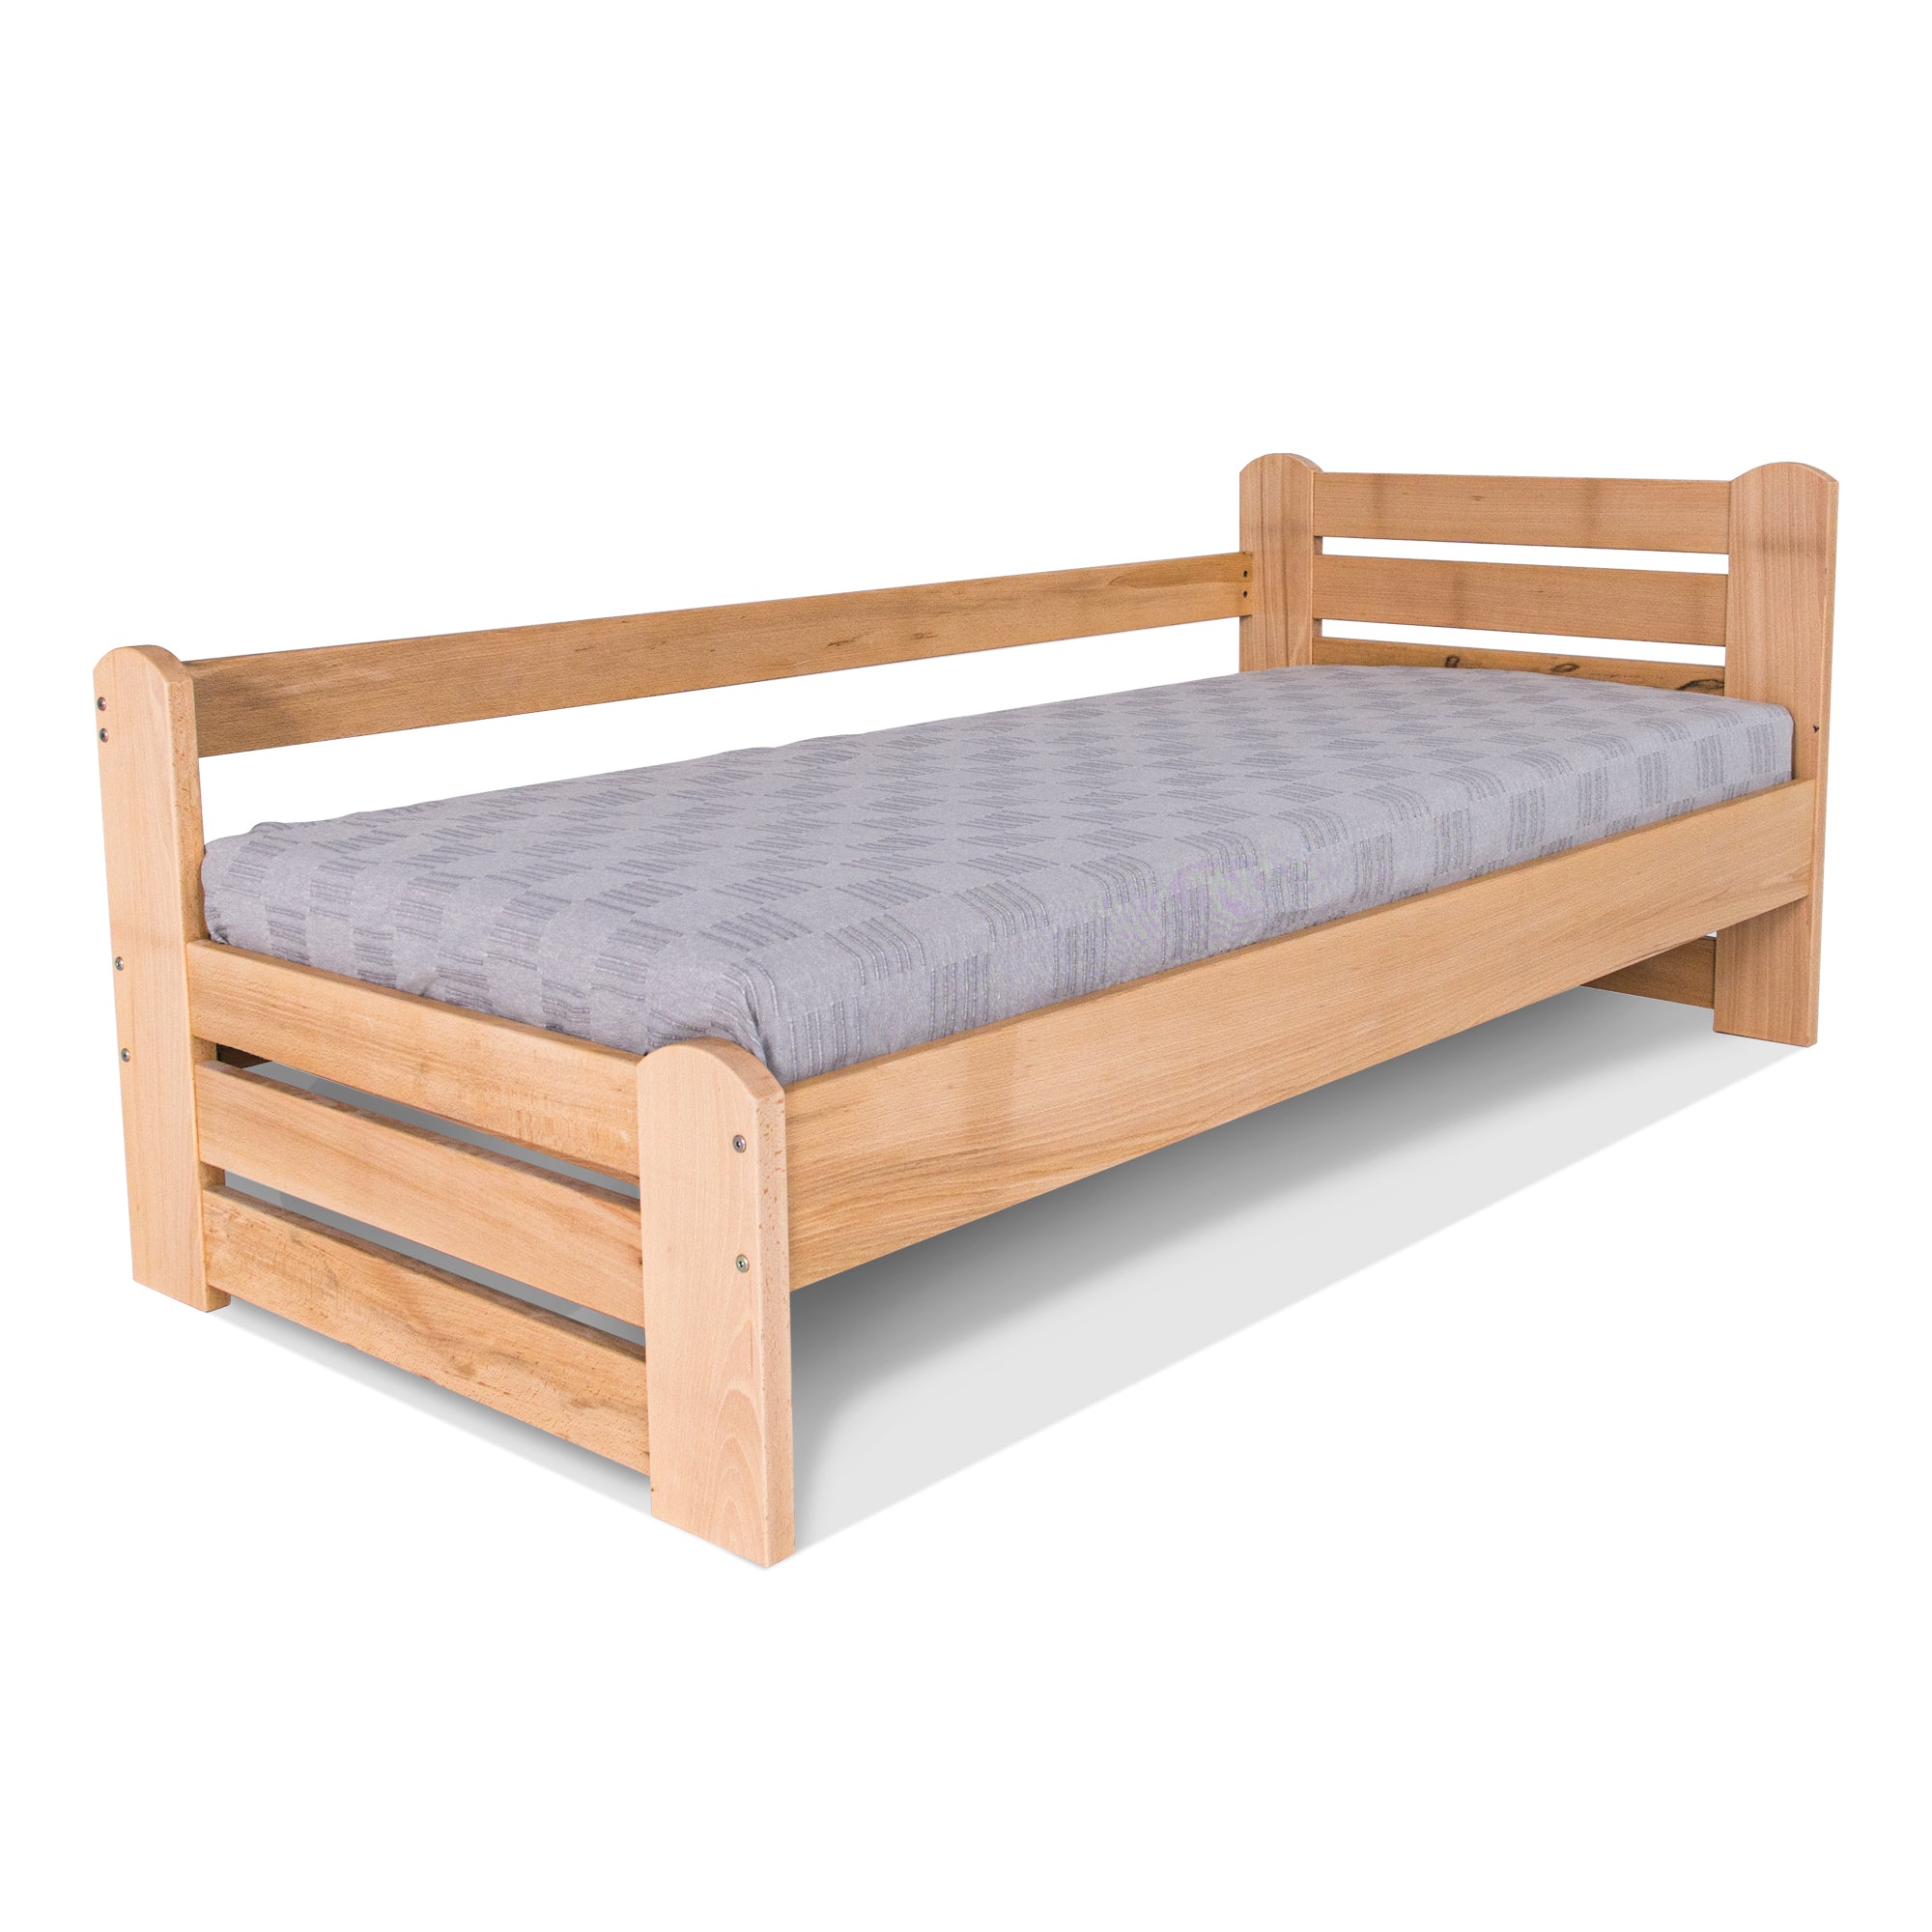 COUNTRY Single Bed with Safety Bar, Beech Wood-natural colour